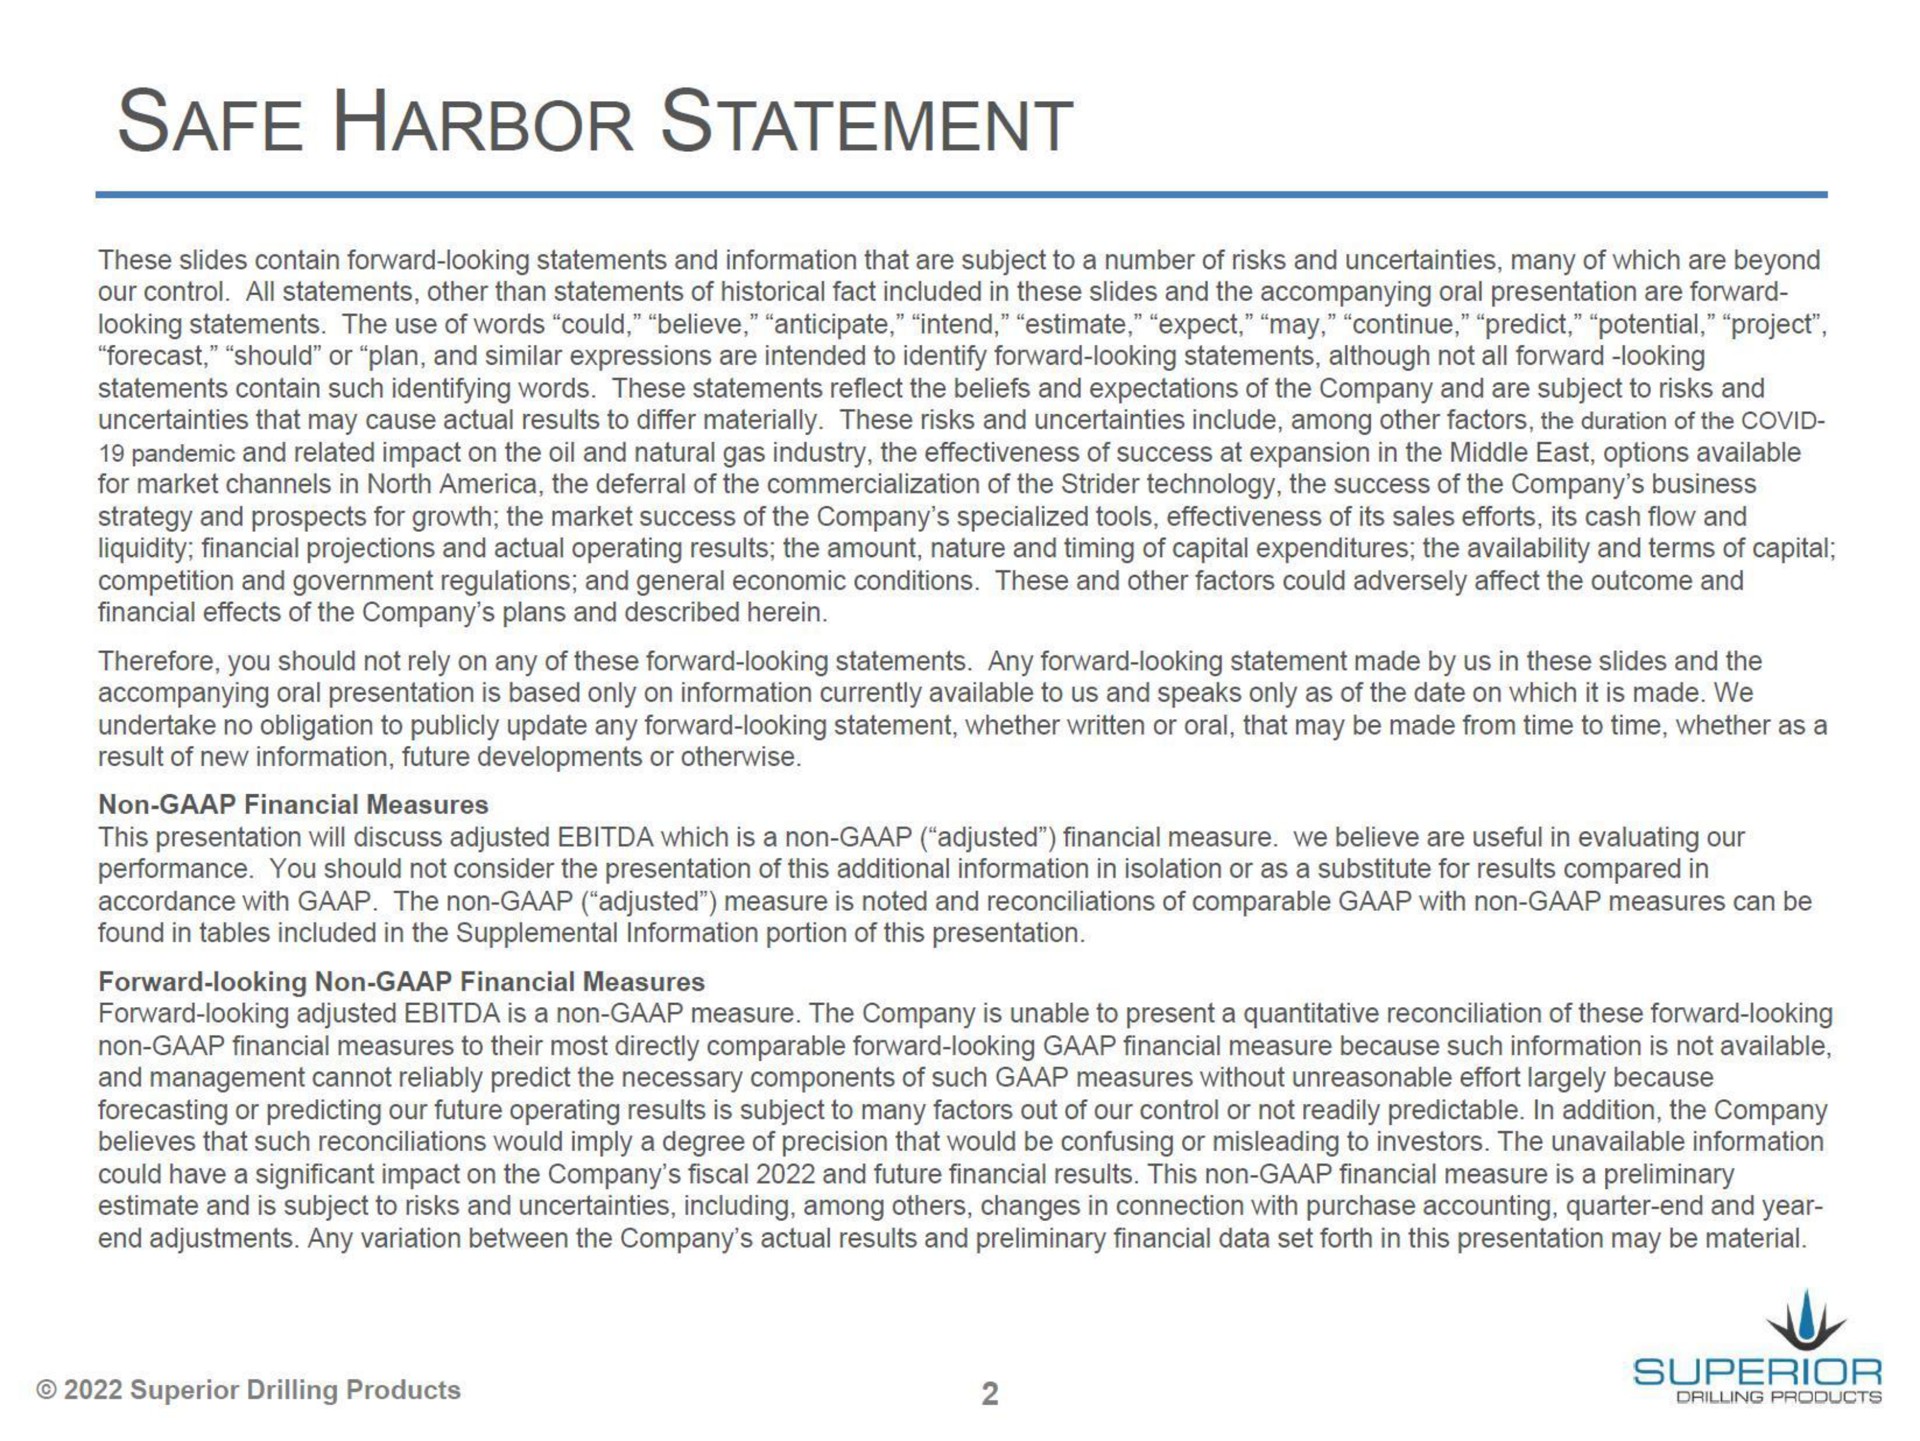 safe harbor statement | Superior Drilling Products